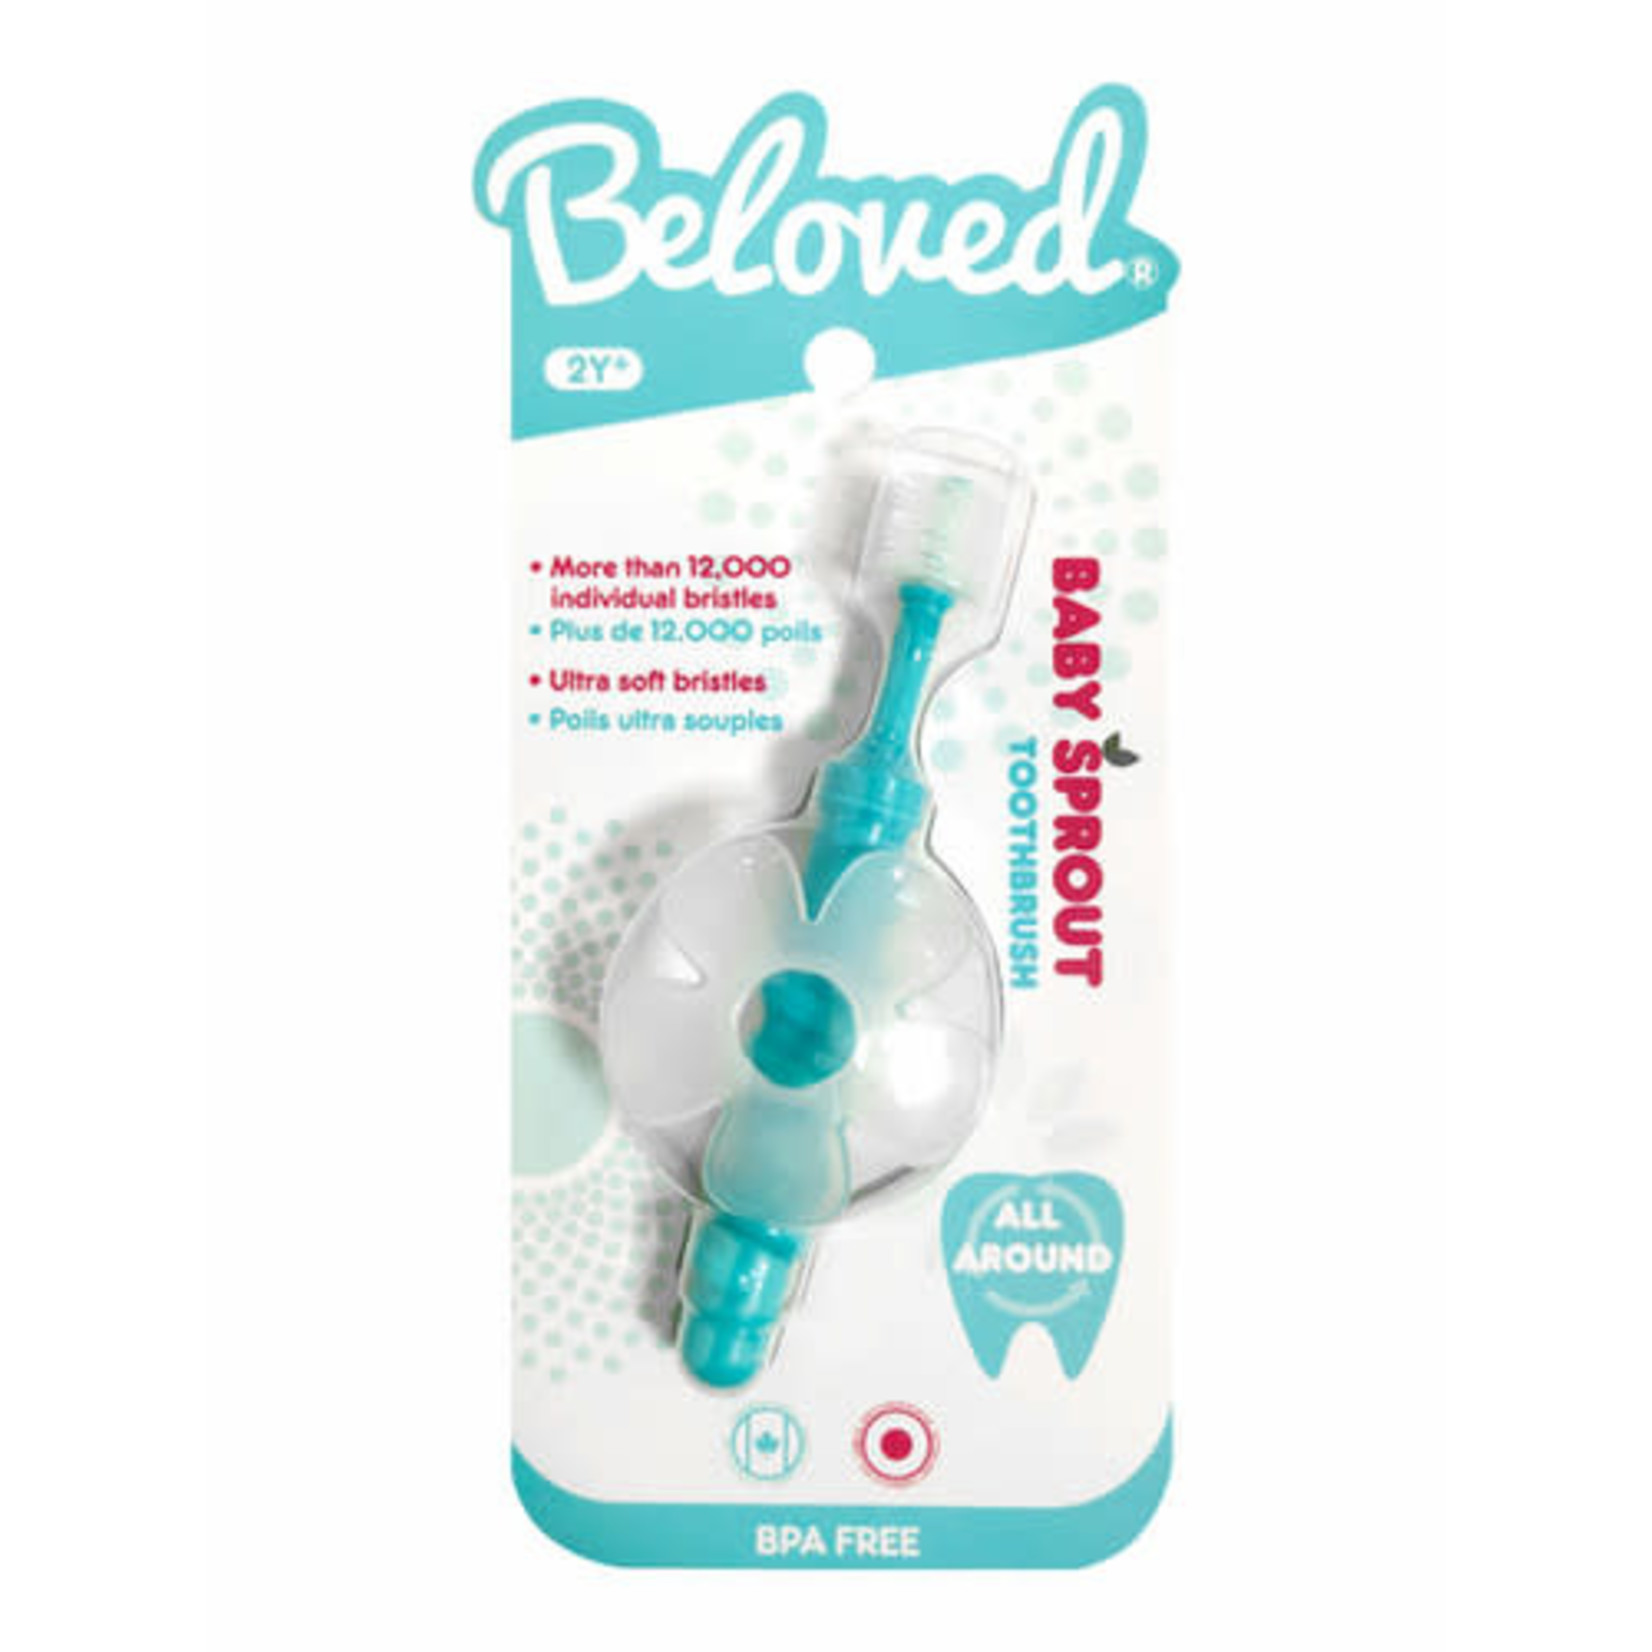 beloved 360 cylinder Sprout toothbrush 2y+